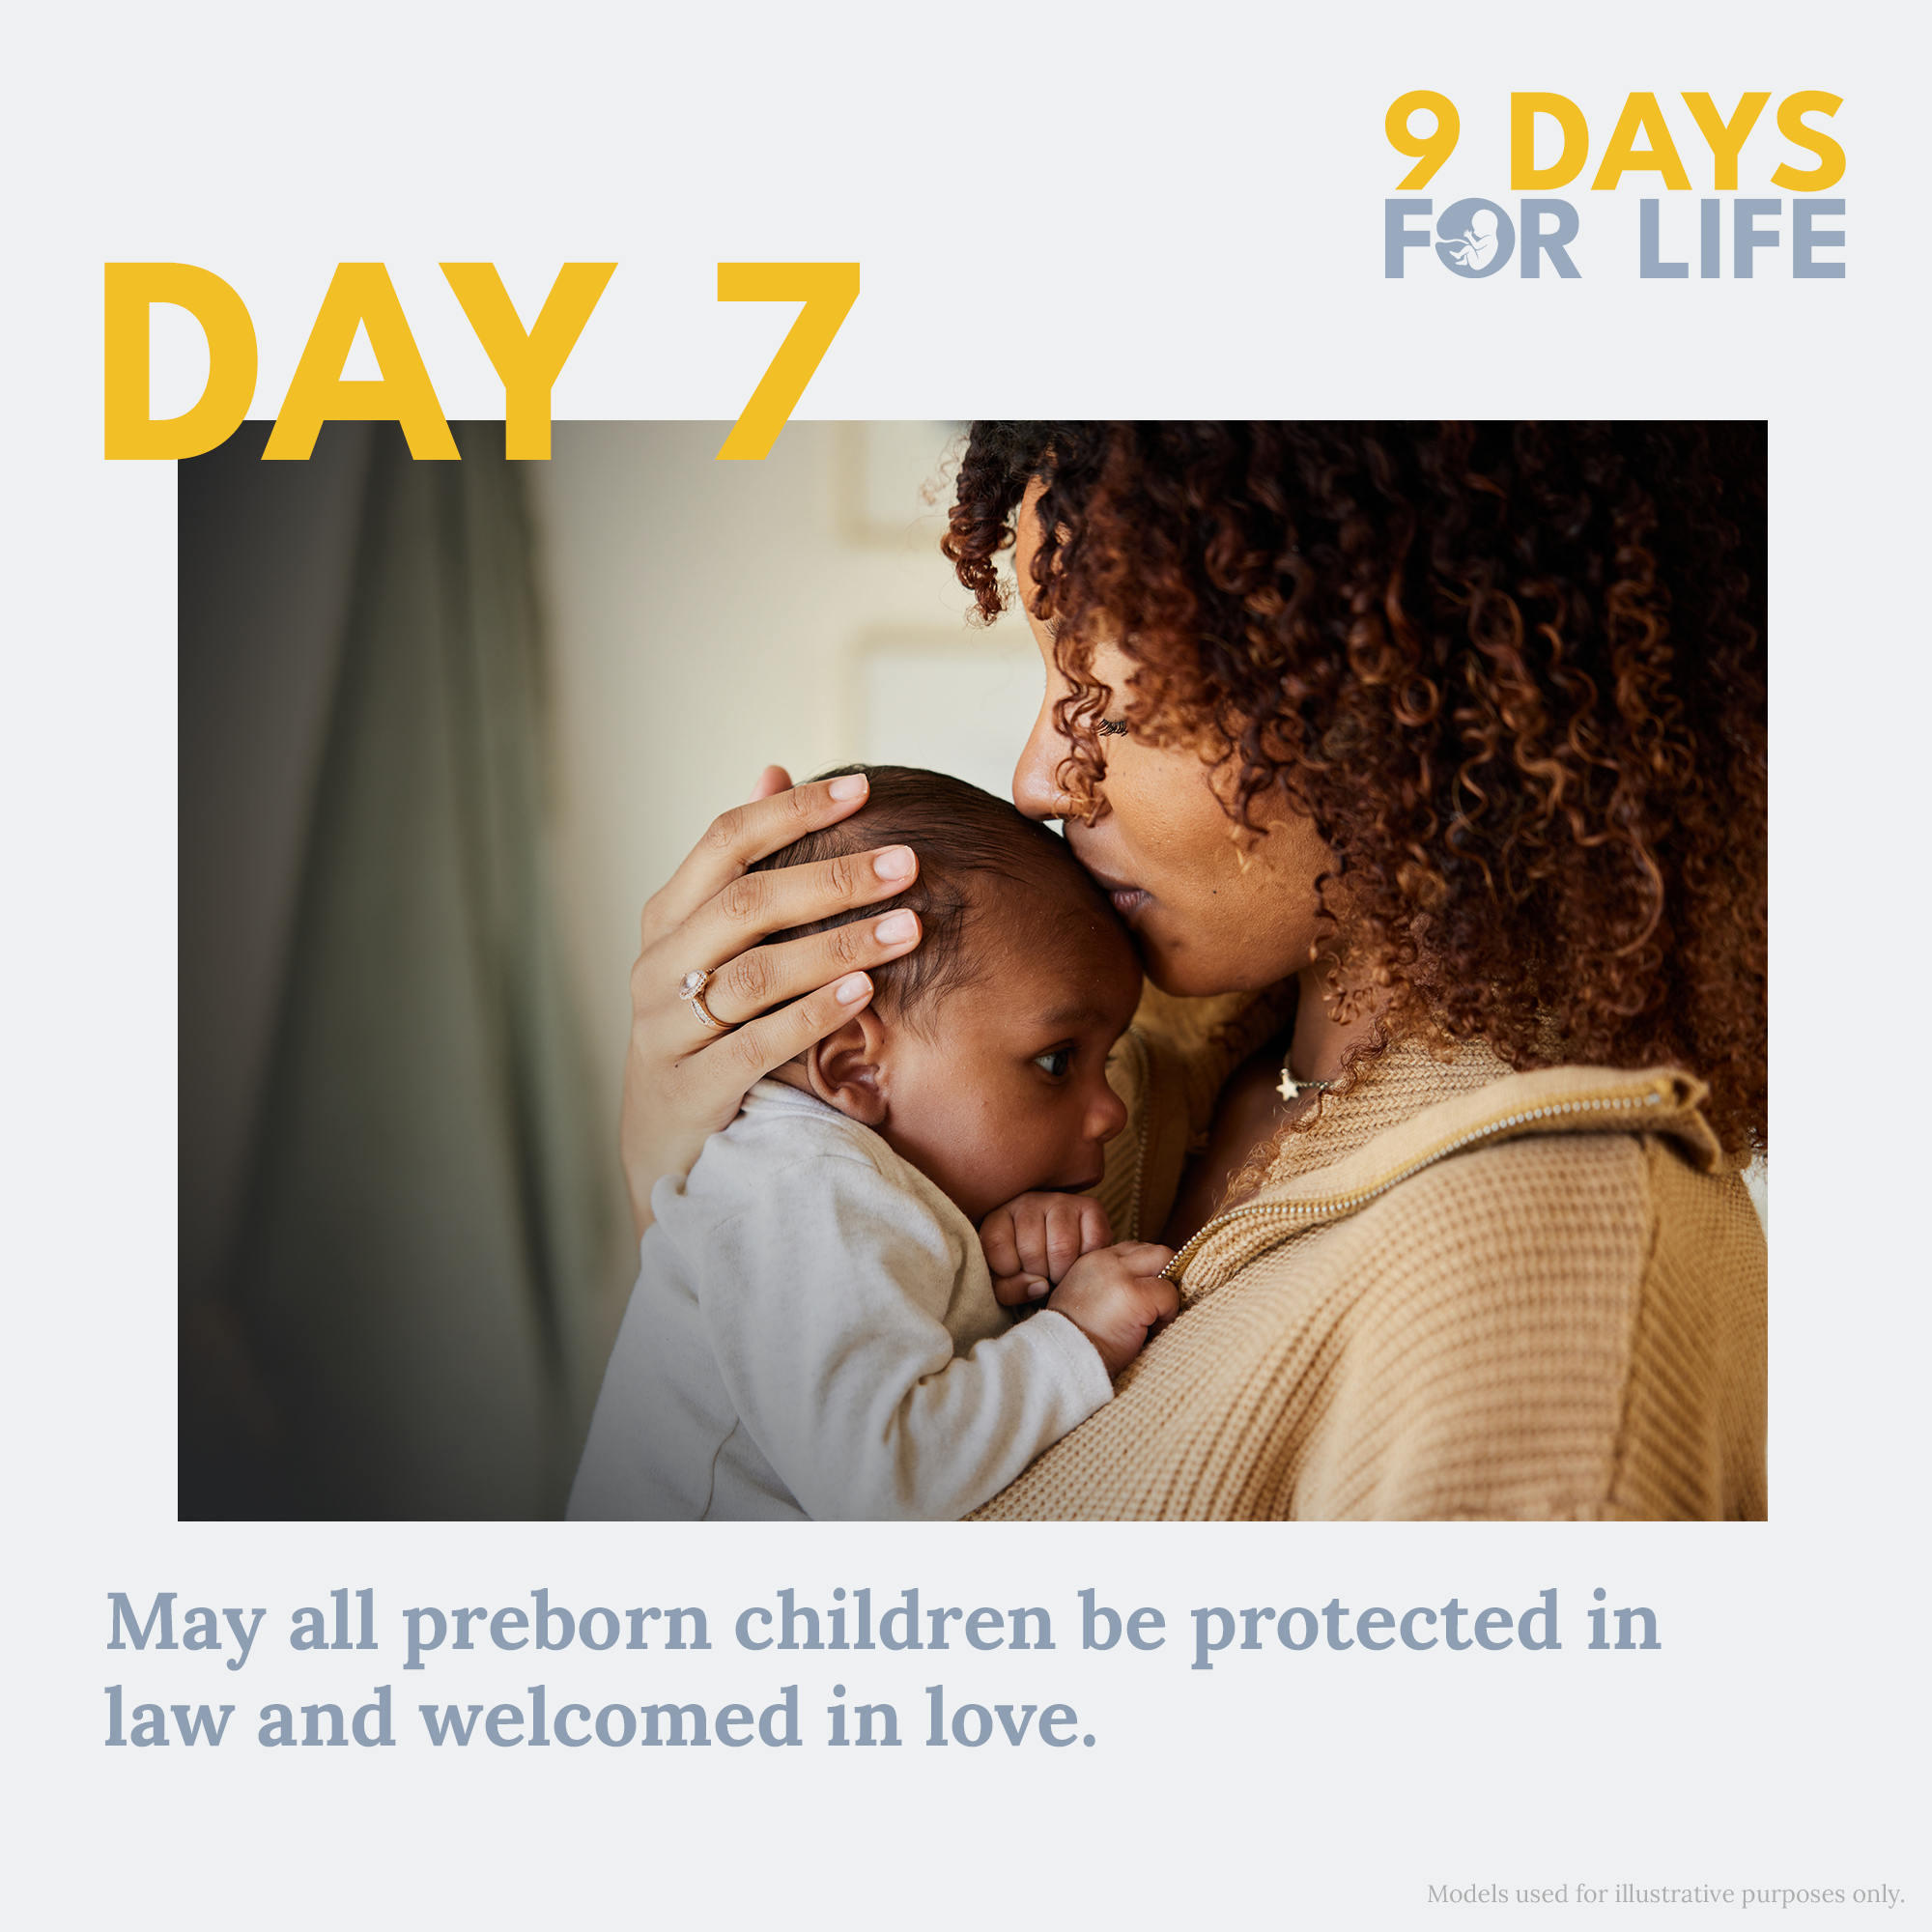 Day 7 - 9 Days for Life graphic - Mother embracing her baby